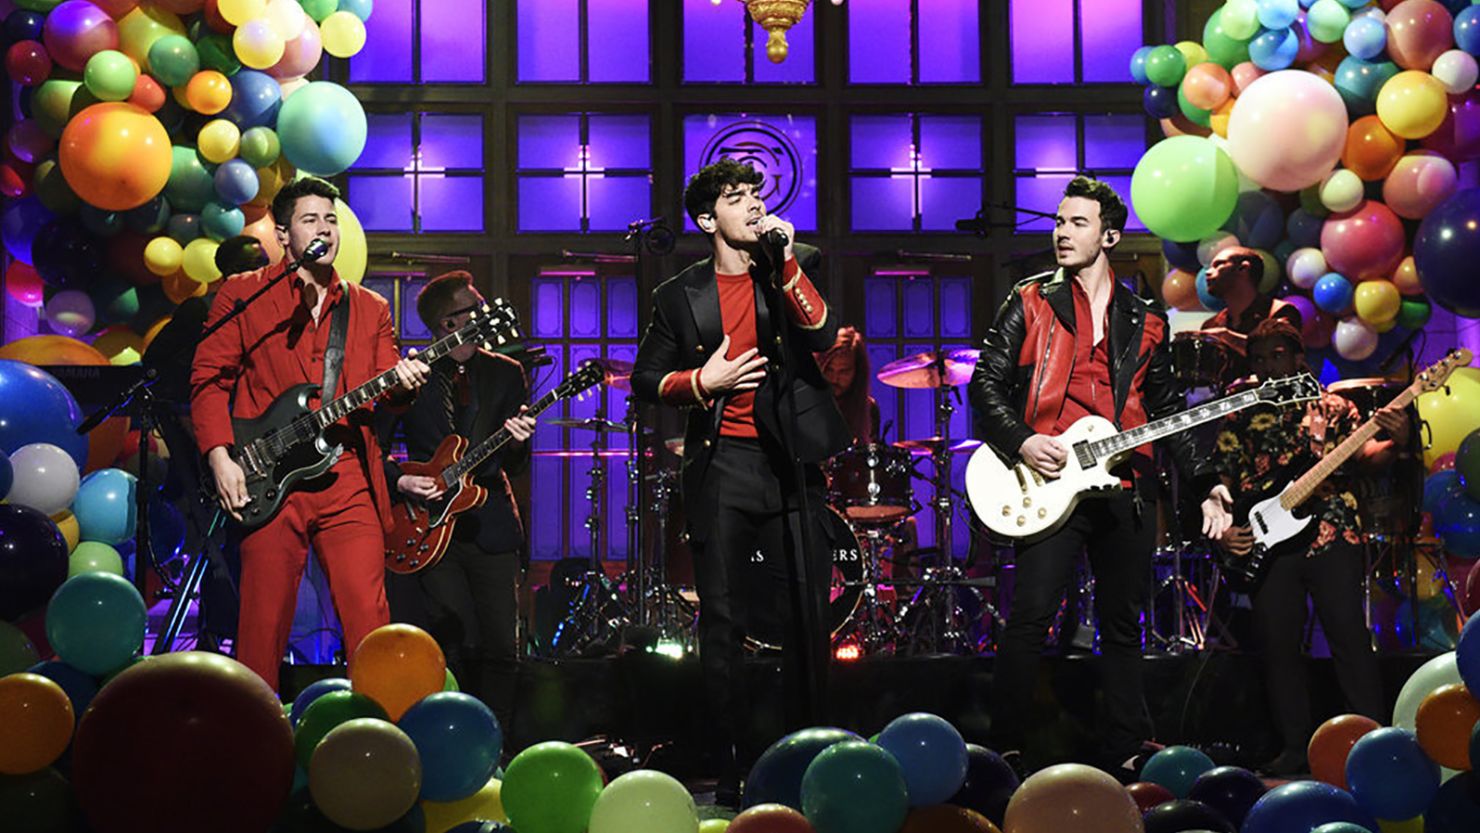 The Jonas Brothers performed their new singles "Sucker" and "Cool" before throwing it back to "Burnin' Up" on "Saturday Night Live."